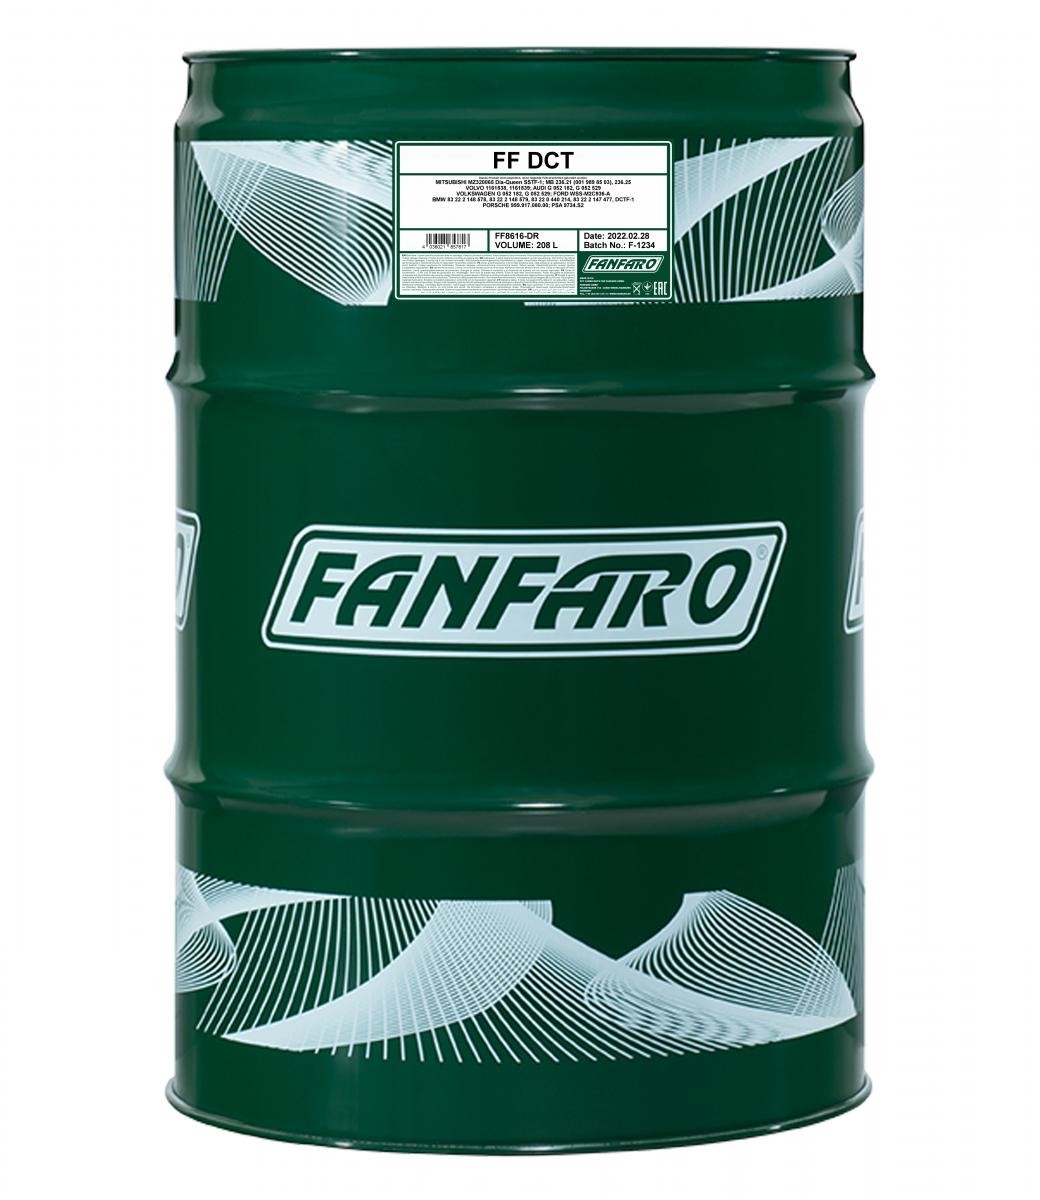 FF8616-DR FANFARO Gearbox oil MAZDA Capacity: 208l, ATF DCT